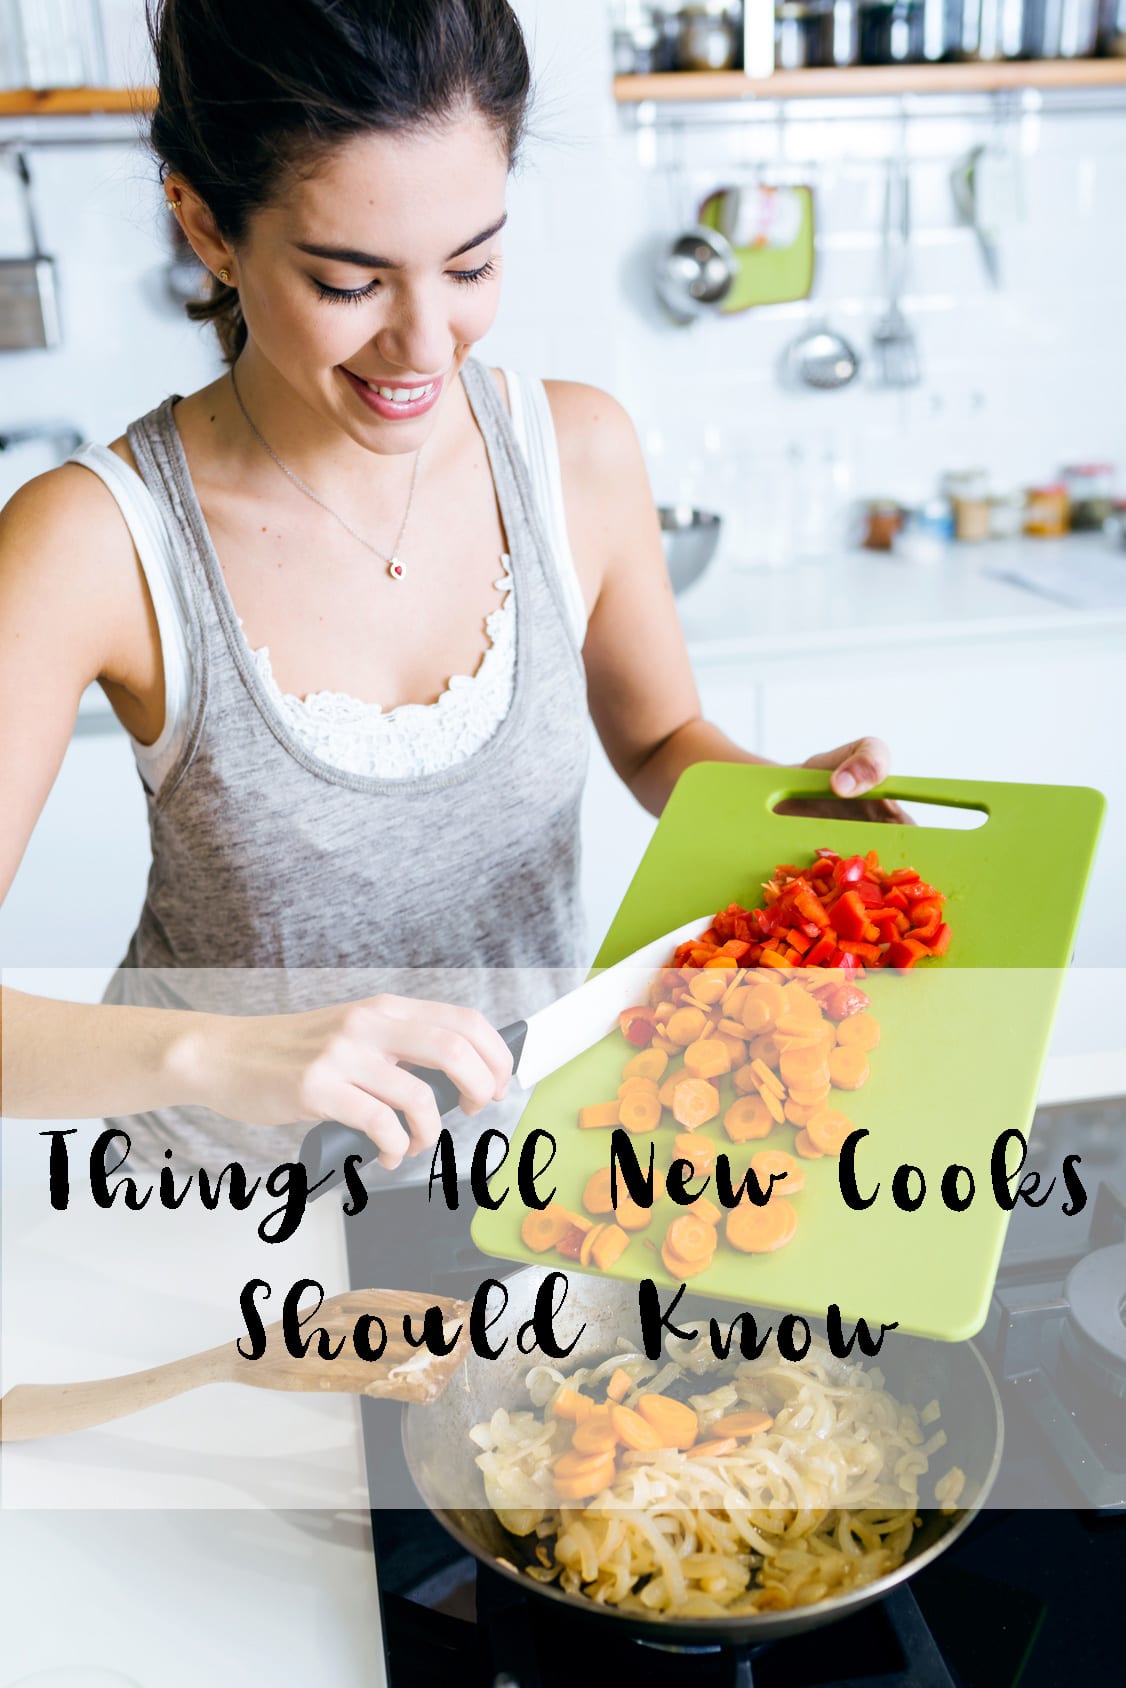 10 Things All New Cooks Should Know